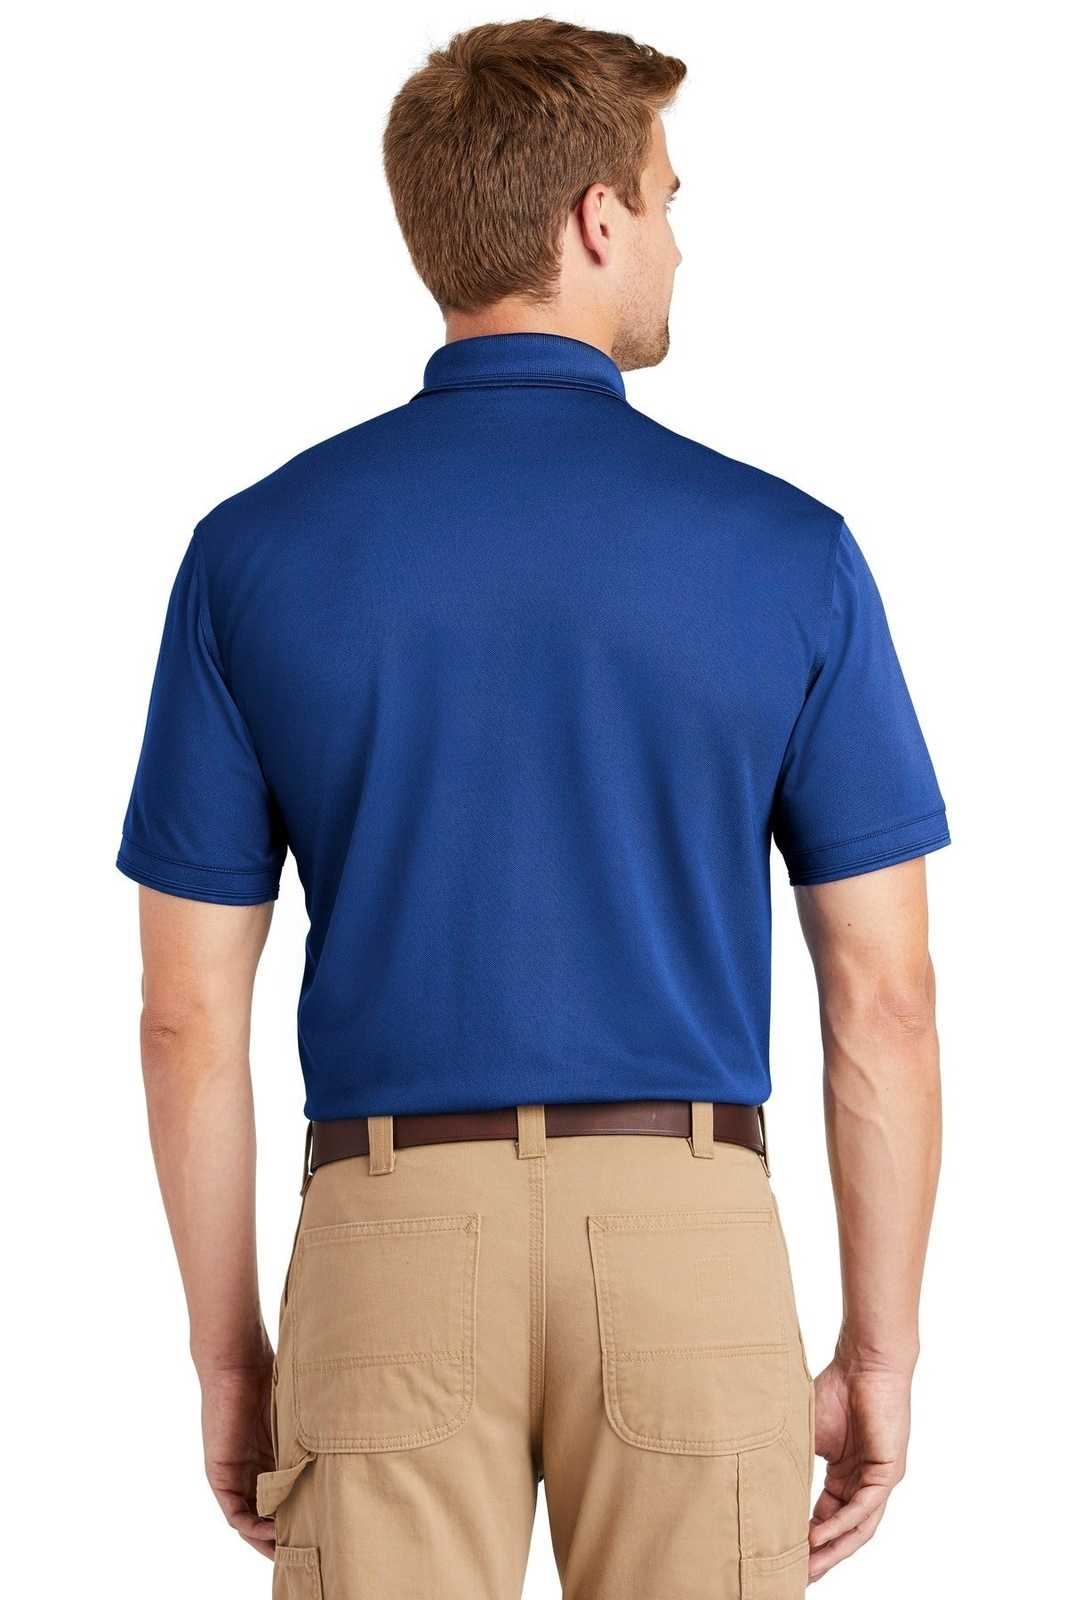 CornerStone CS4020 Industrial Snag-Proof Pique Polo - Royal - HIT a Double - 2